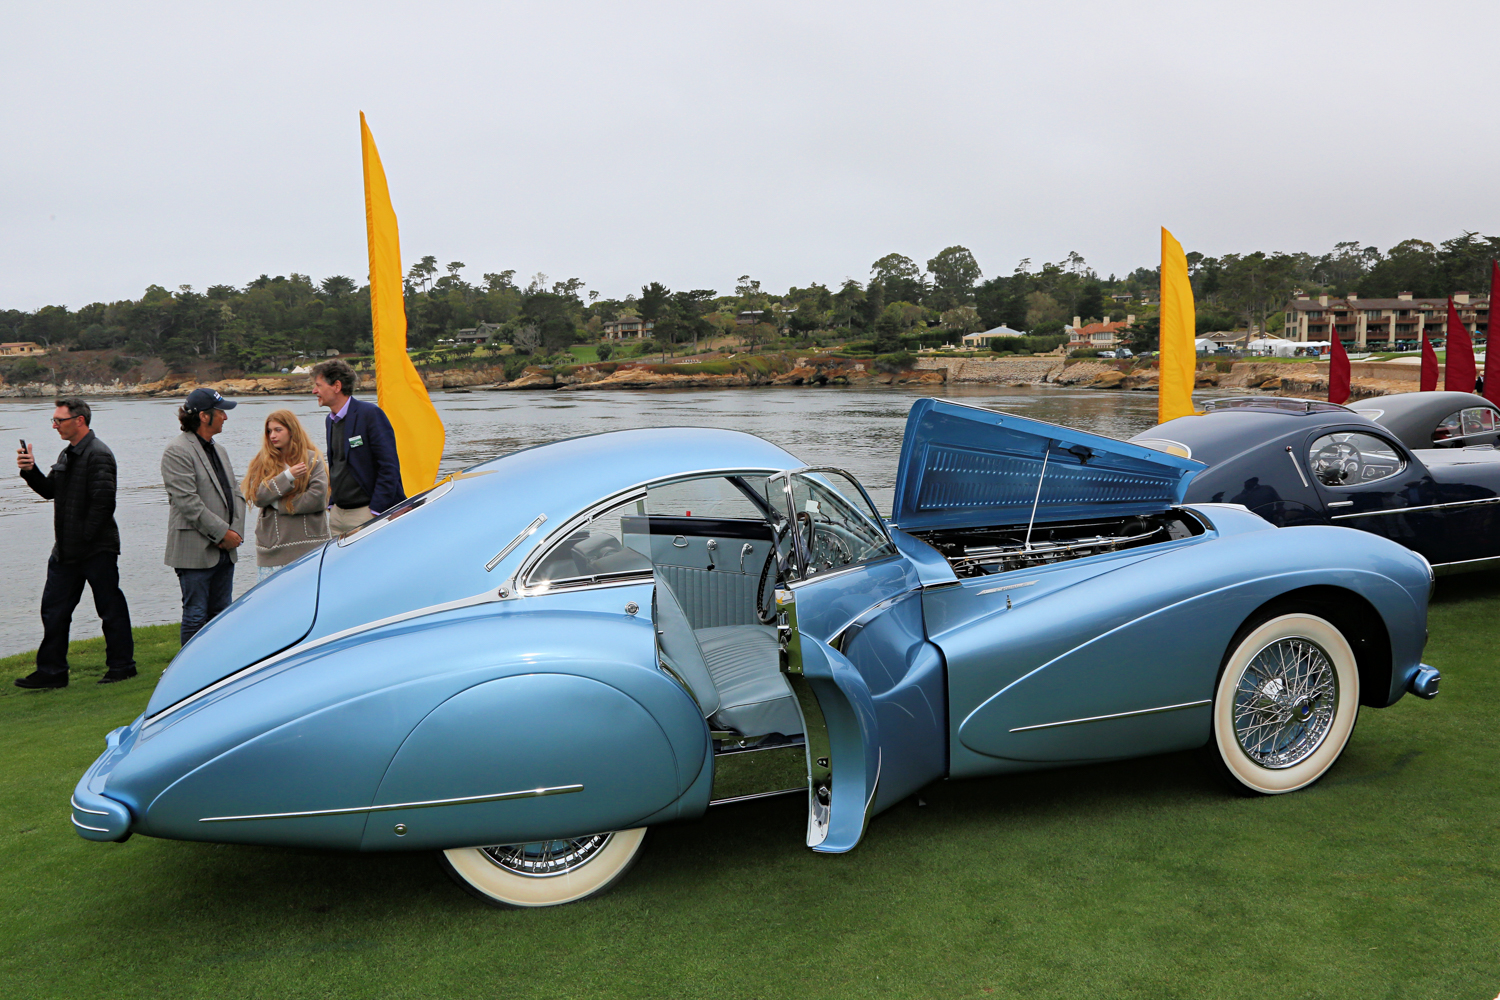 1948 Talbo-Lago T26 Grand Sport Saoutchik Fastback Coupe  The Cussler Family